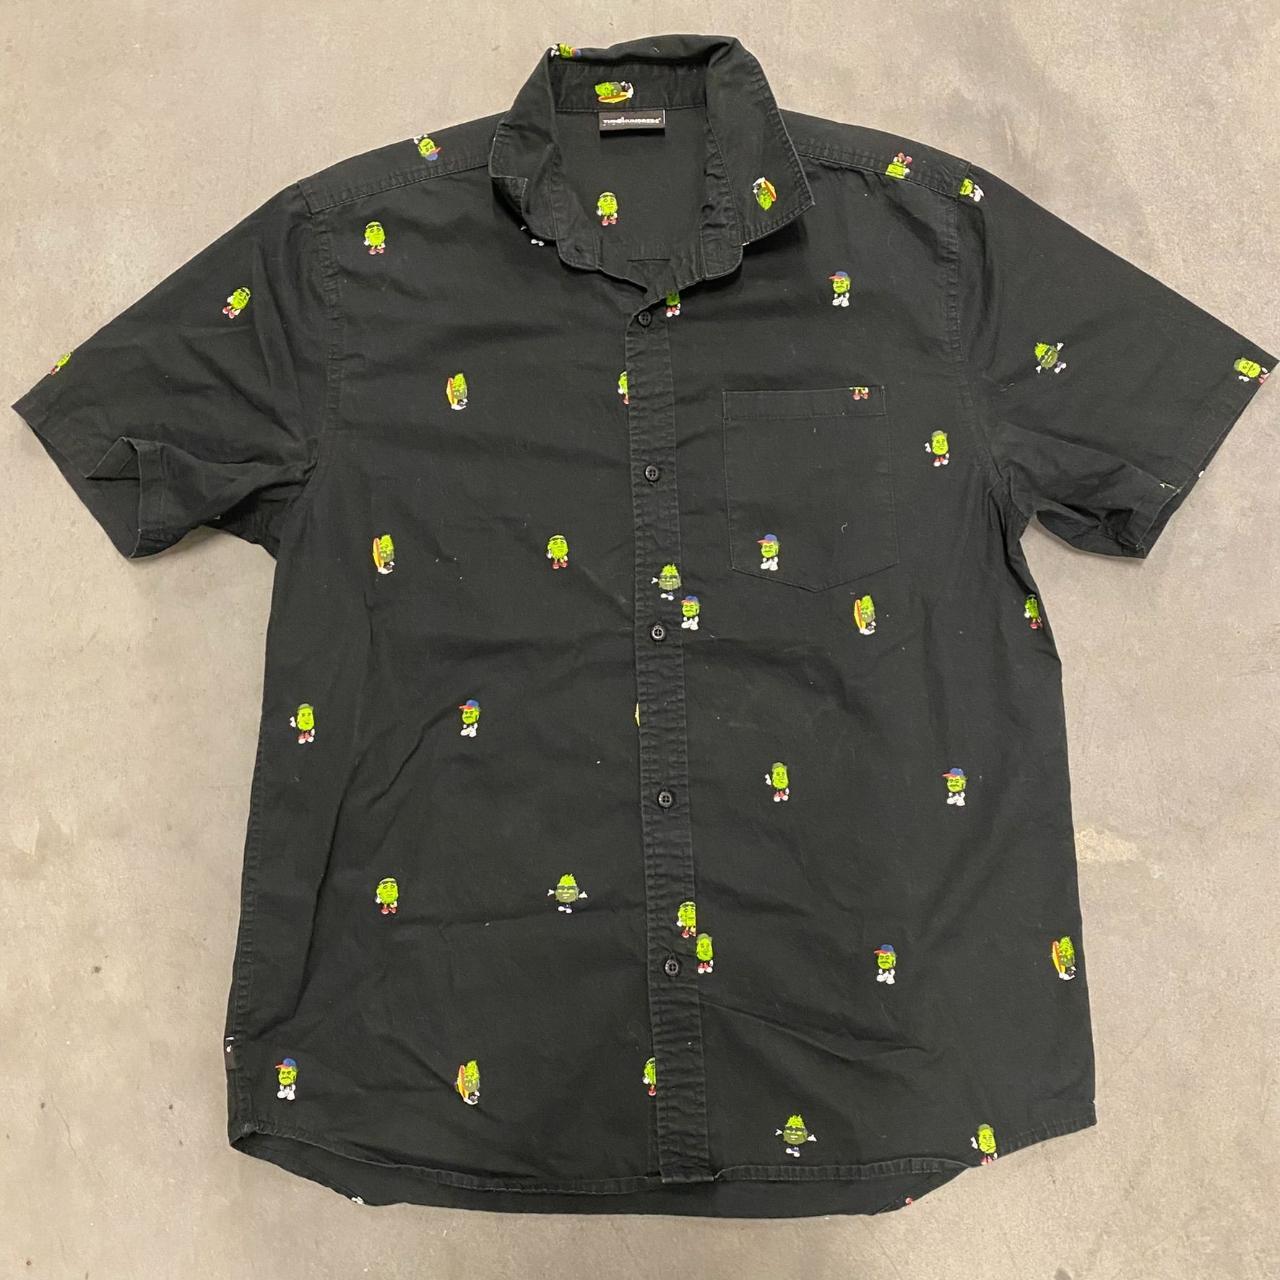 Product Image 1 - The Hundreds Bean Shirt
Size: XL
Chest: